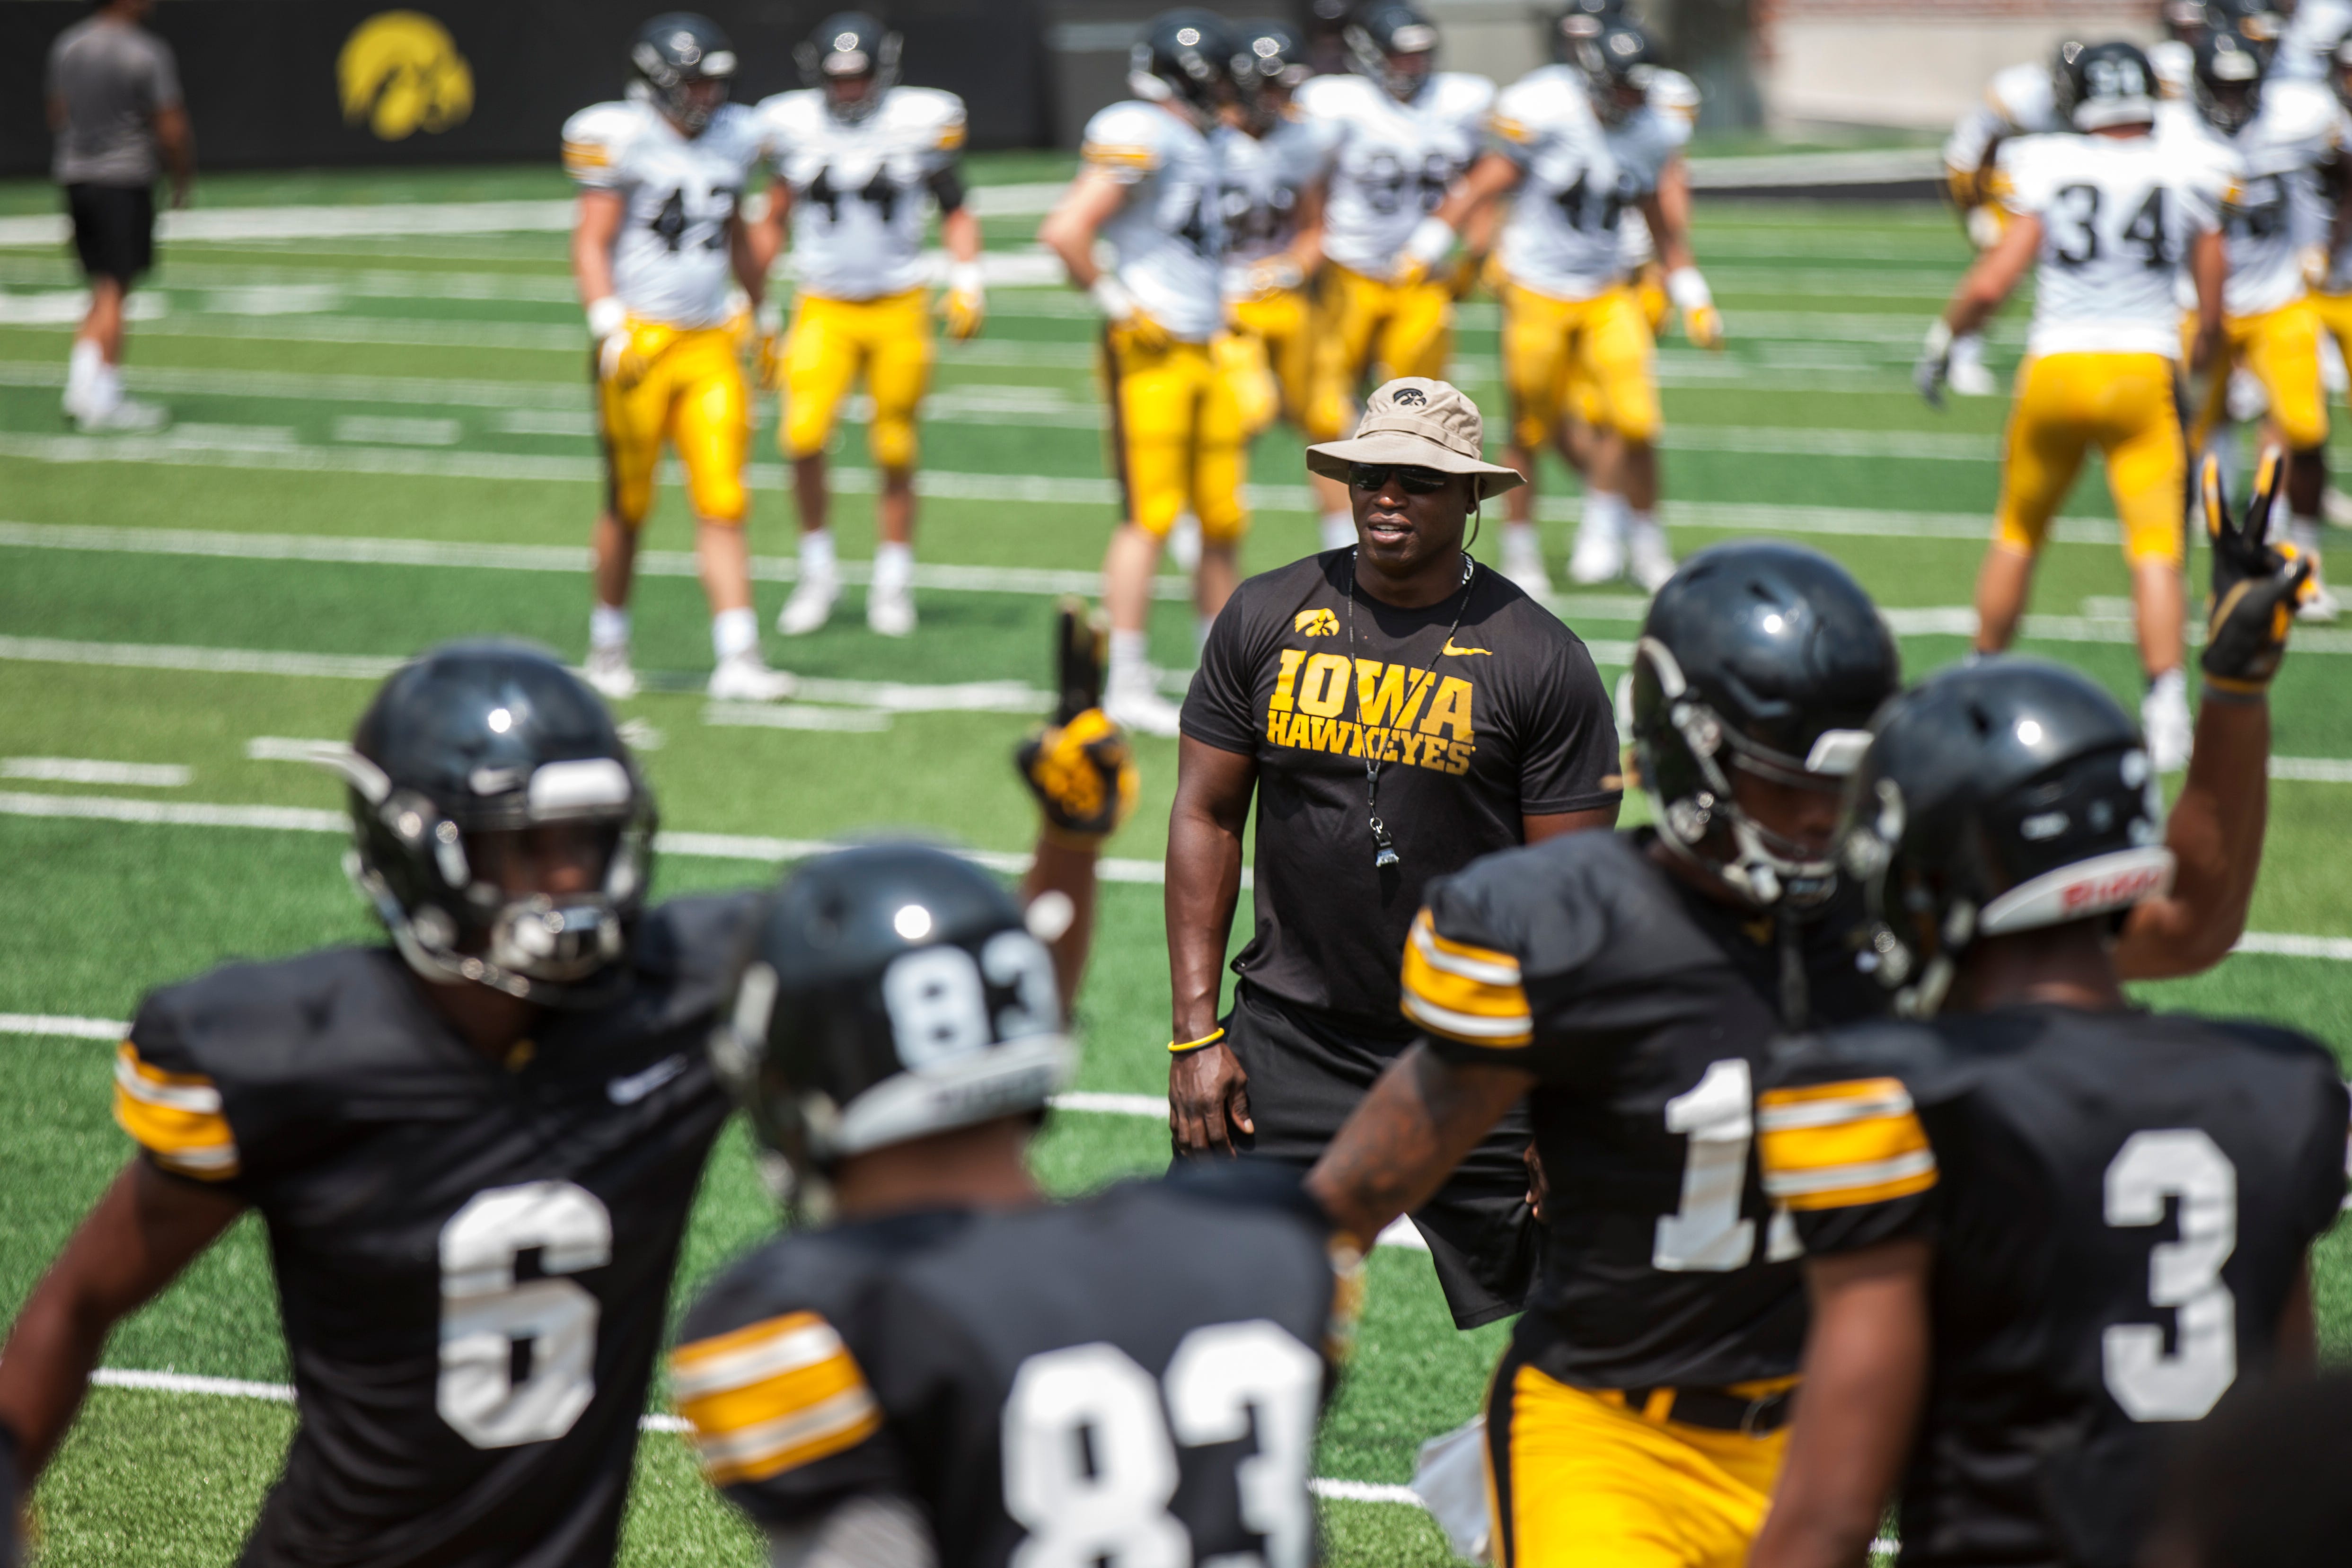 Iowa wide receivers coach Kelton Copeland watches players warm up during a Kids Day practice on Saturday, Aug. 11, 2018, at Kinnick Stadium in Iowa City.